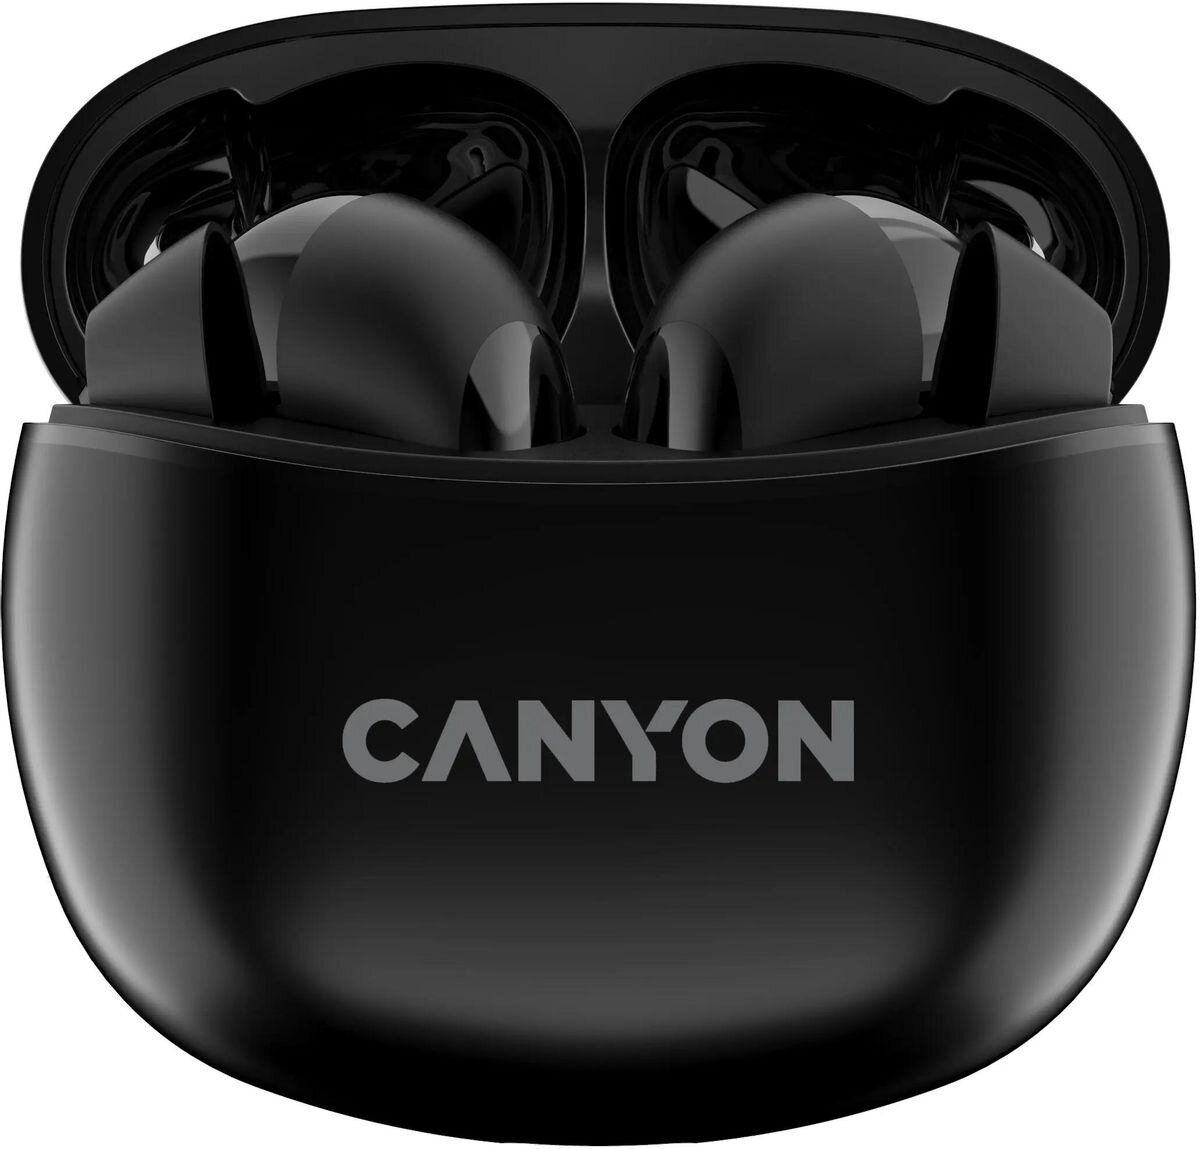 CANYON TWS-5, Bluetooth headset, with microphone, BT V5.3 JL 6983D4, Frequence Response:20Hz-20kHz, battery EarBud 40mAh*2+Charging Case 500mAh, type-